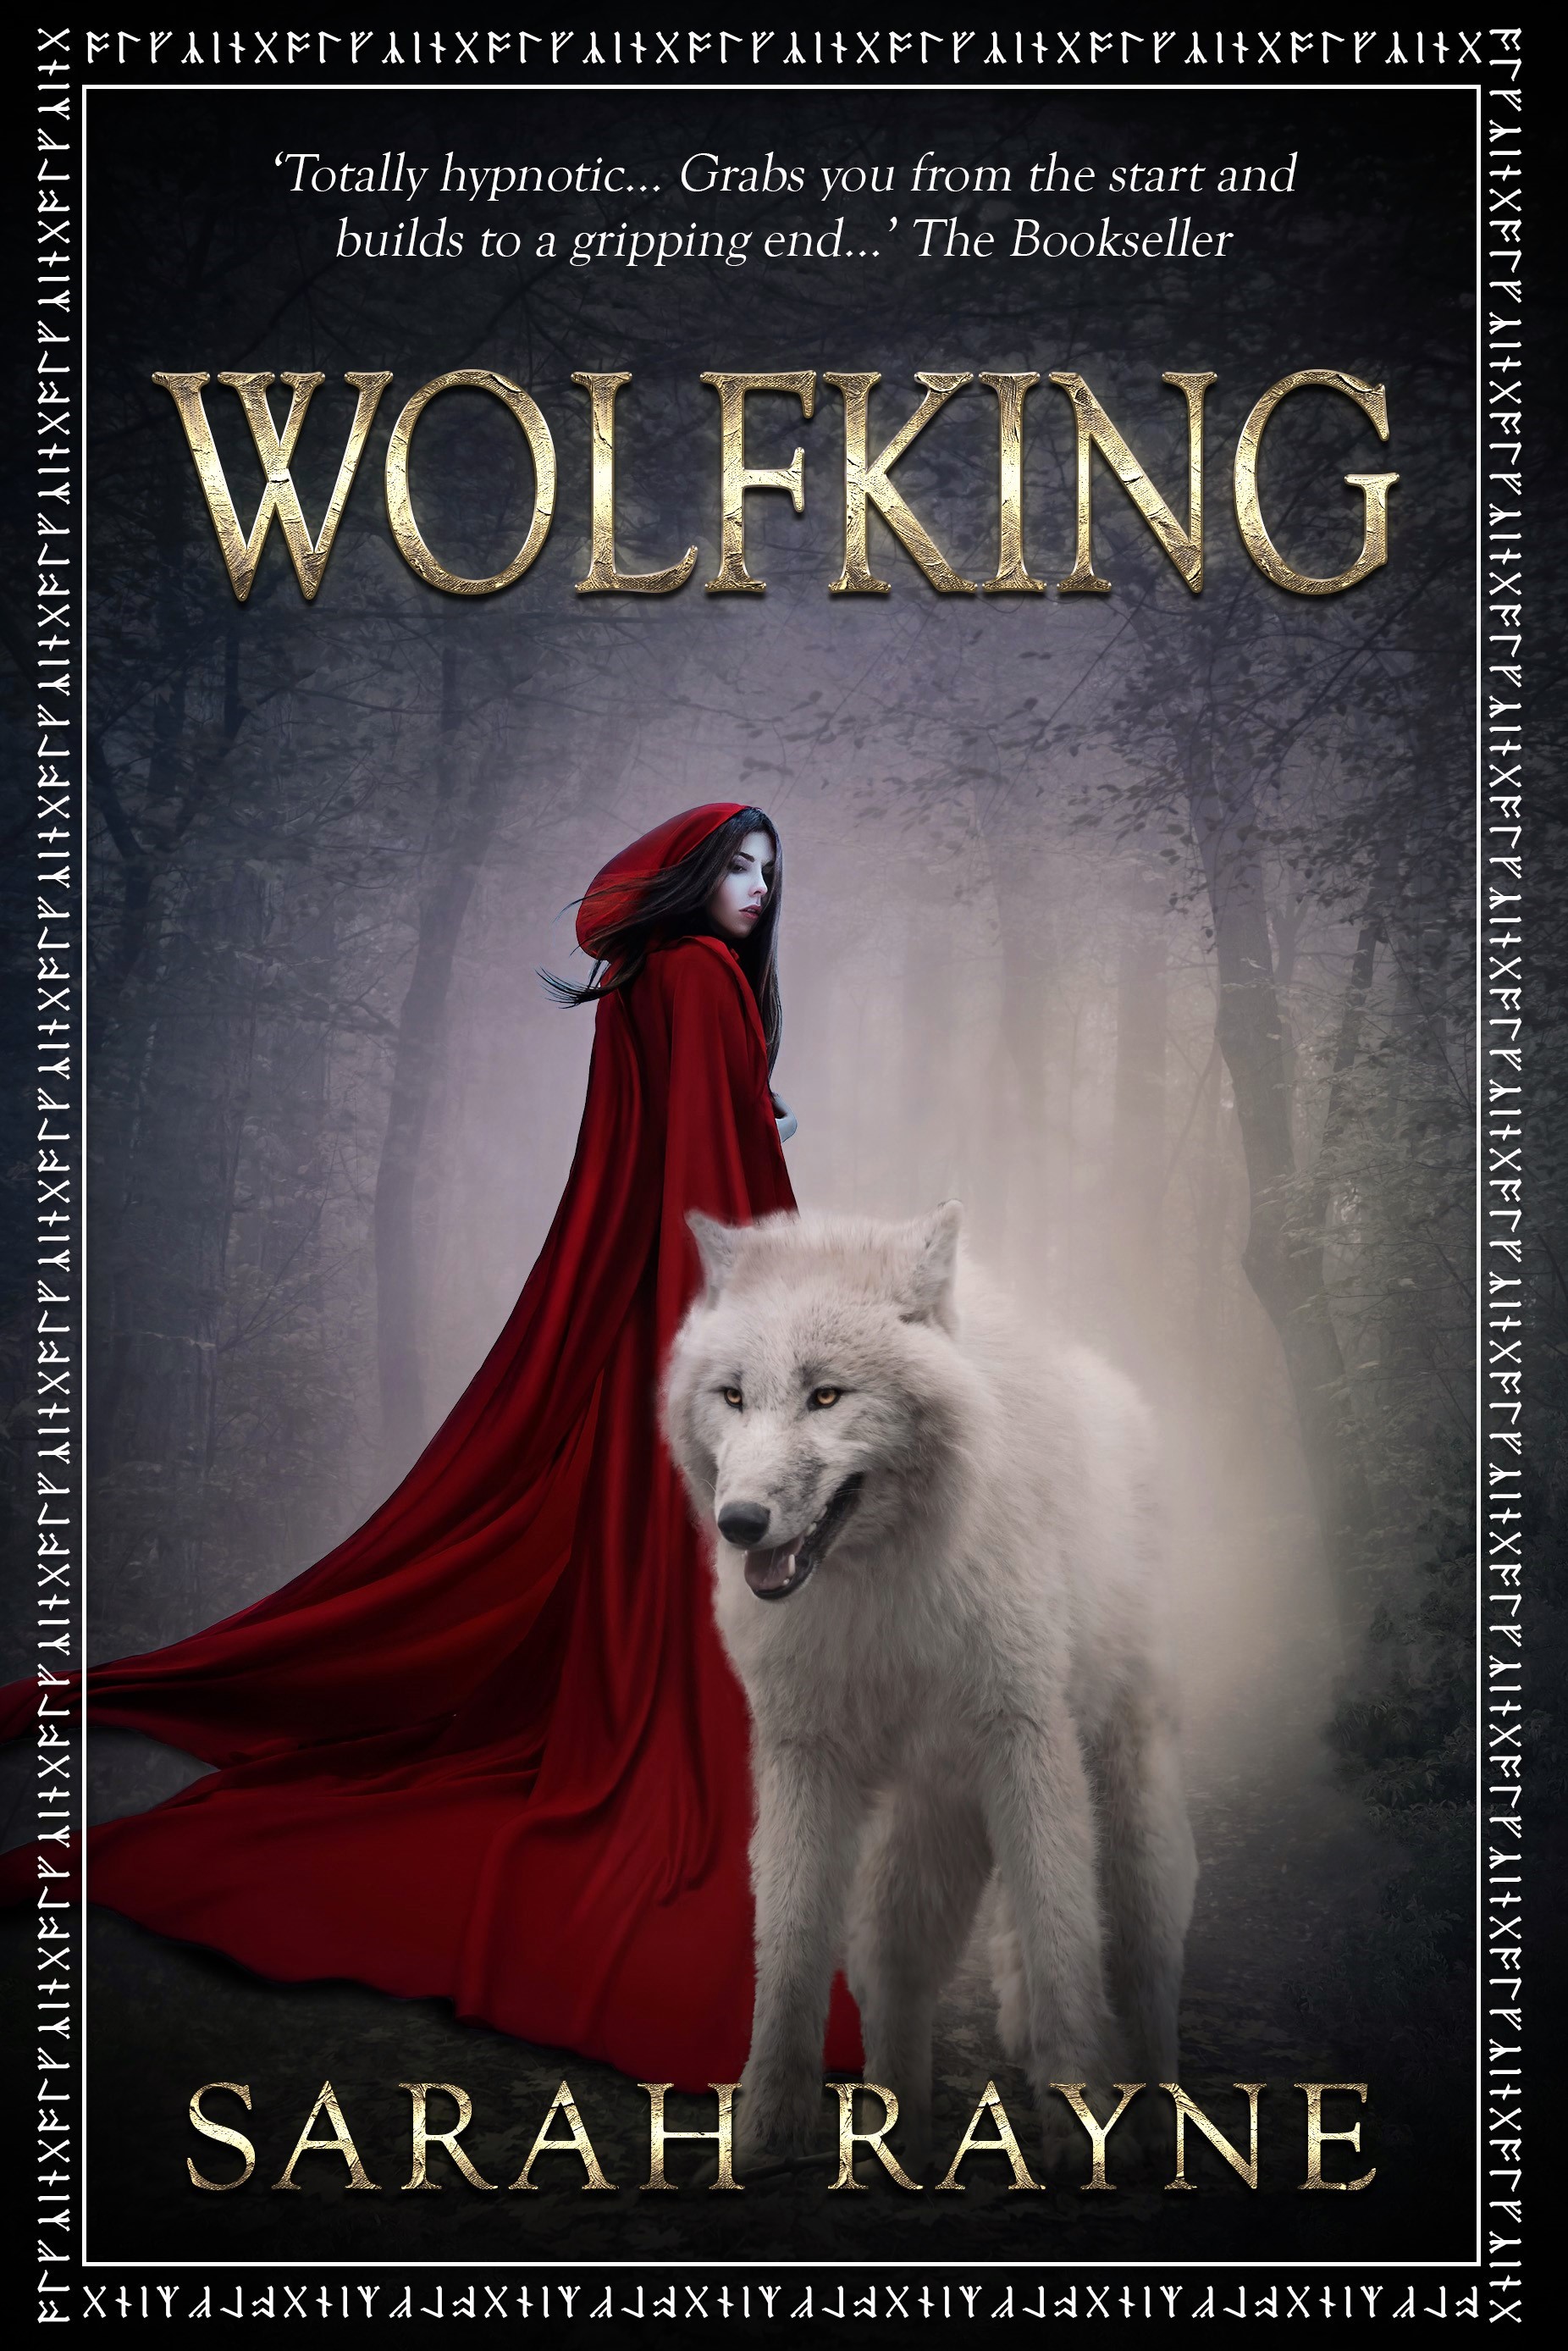 Wolfking: Book 1